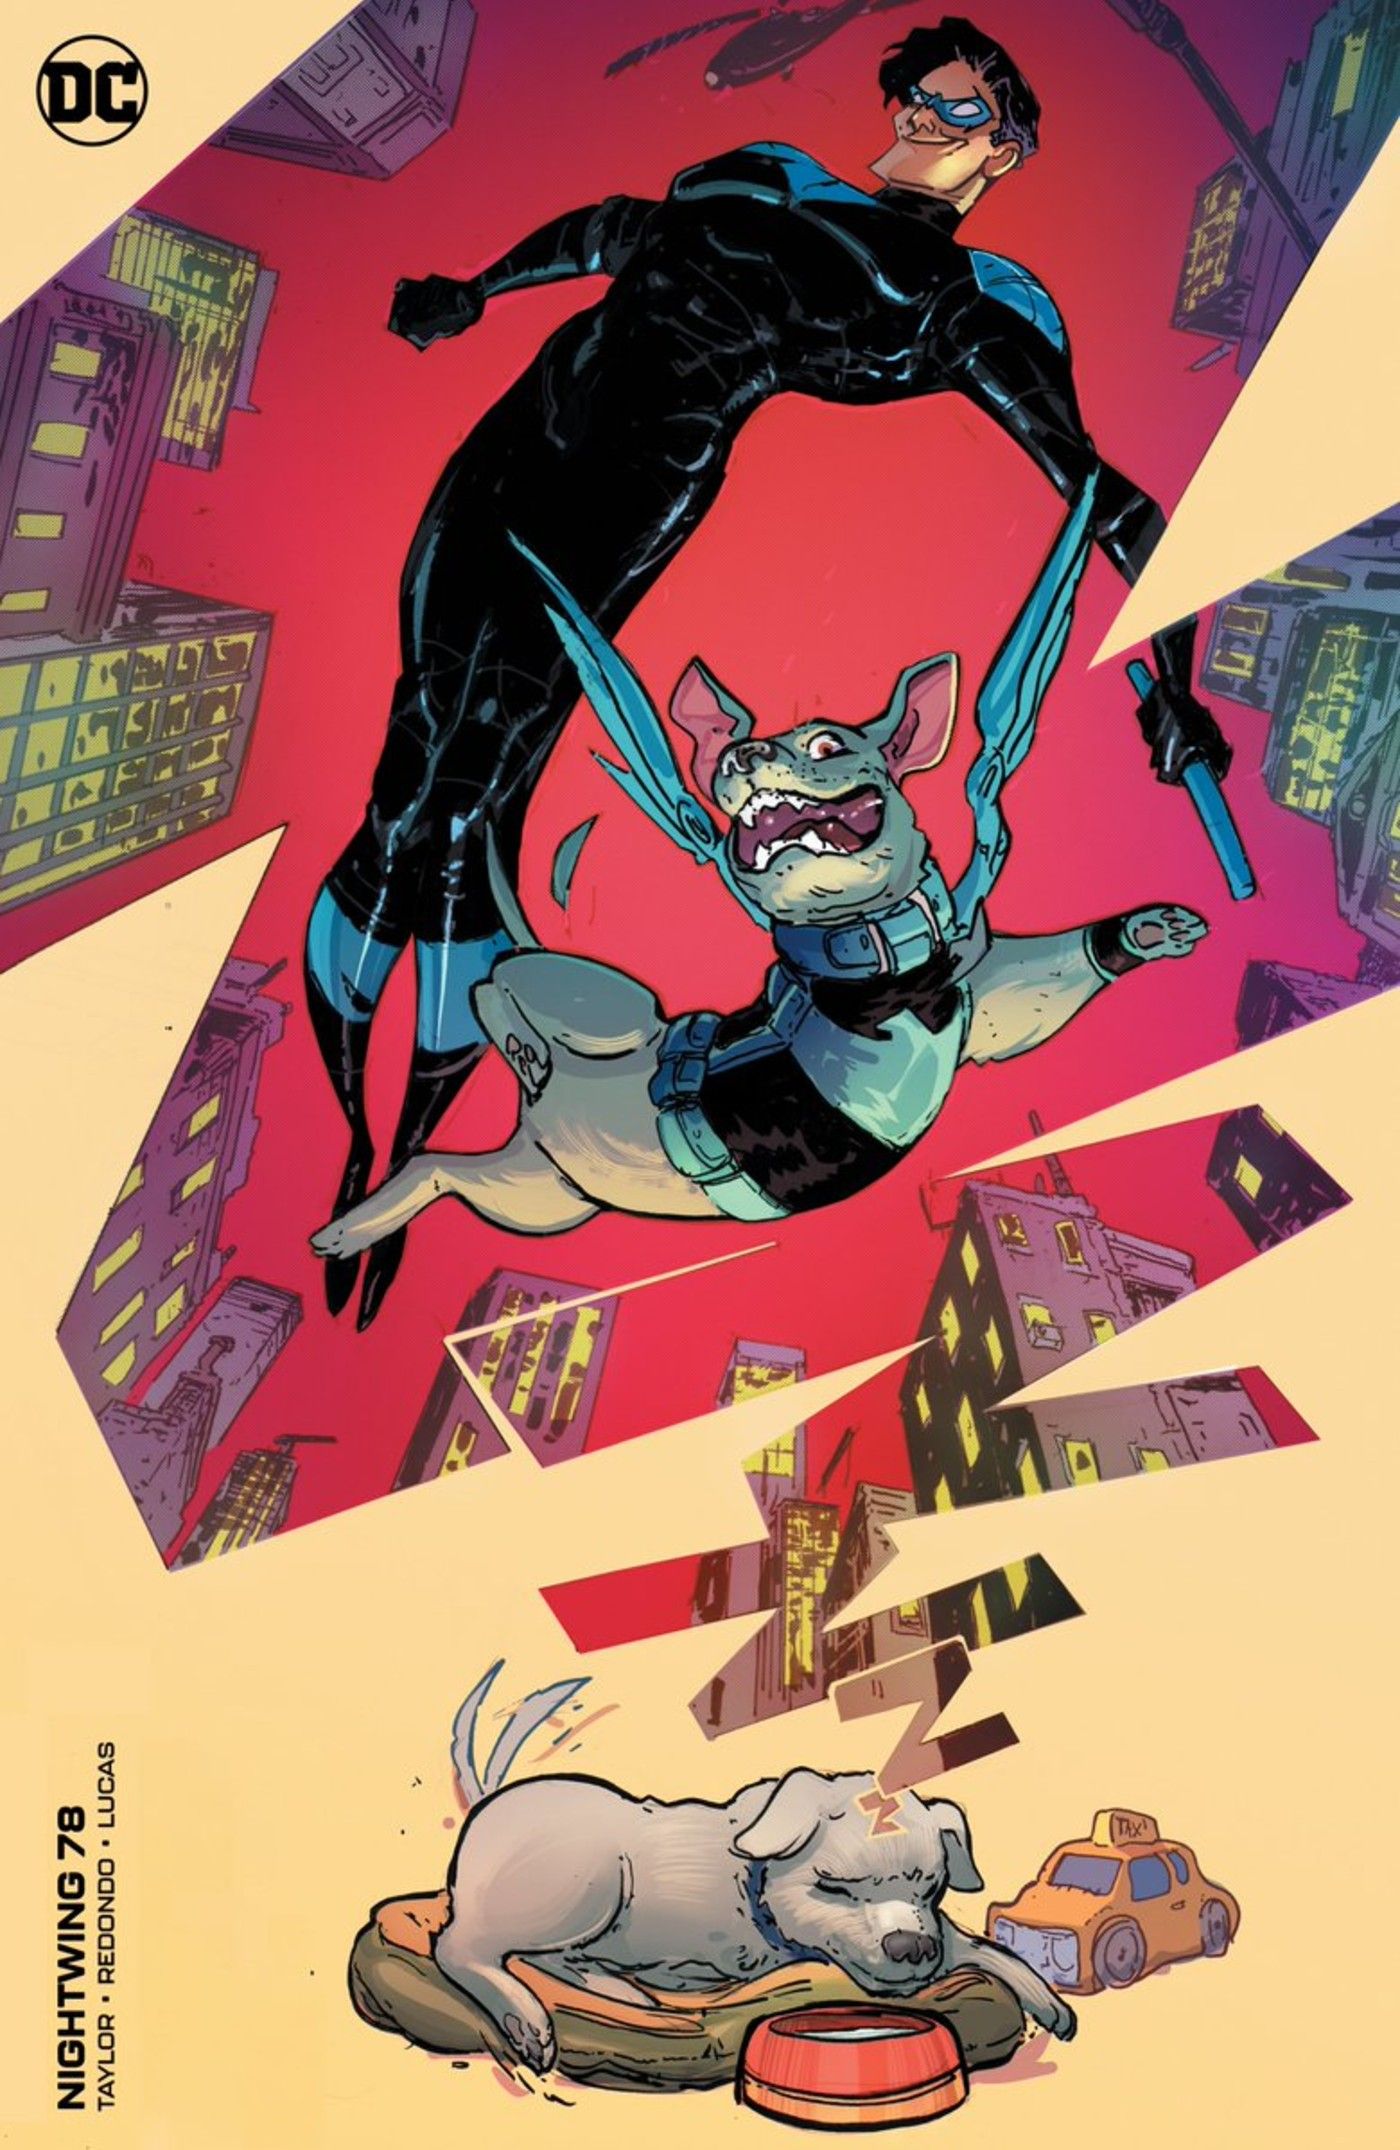 Nightwing Variant Cover Gives His Dog Sidekick Her Own Costume